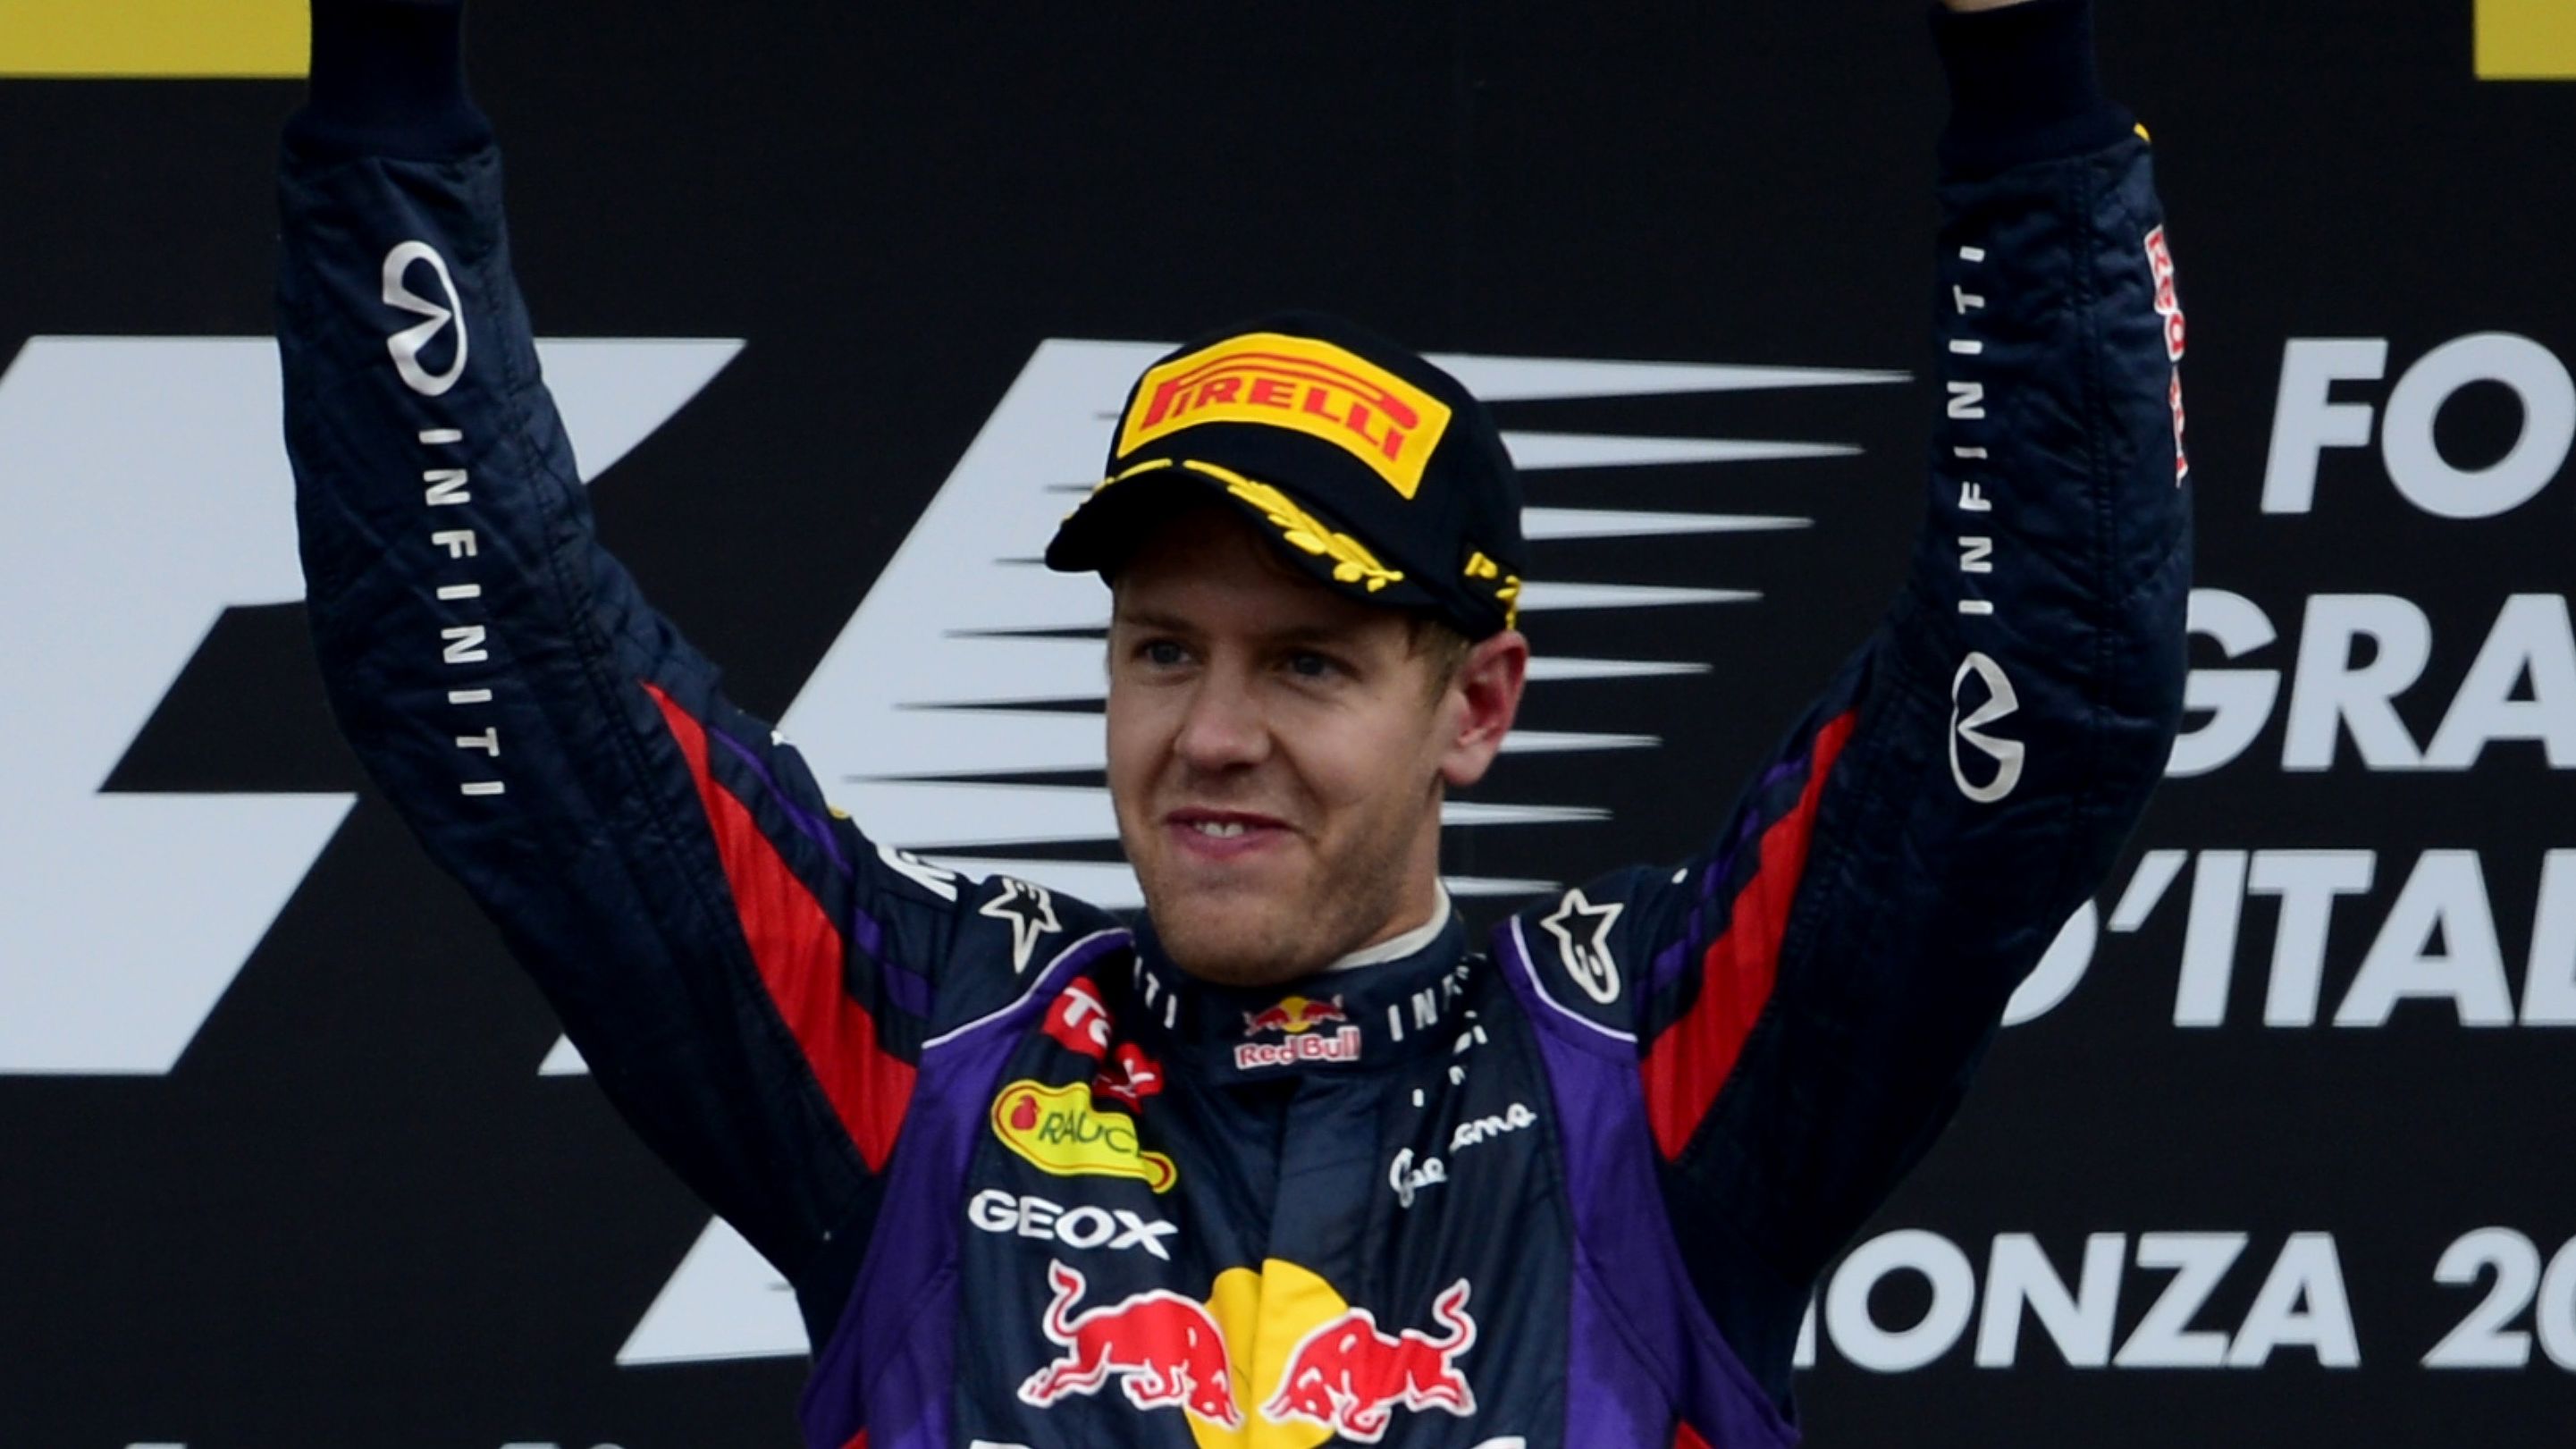 Sebastian Vettel celebrates his sixth victory of the 2013 season to extend his lead in the title race to 53 points over Fernando Alonso.